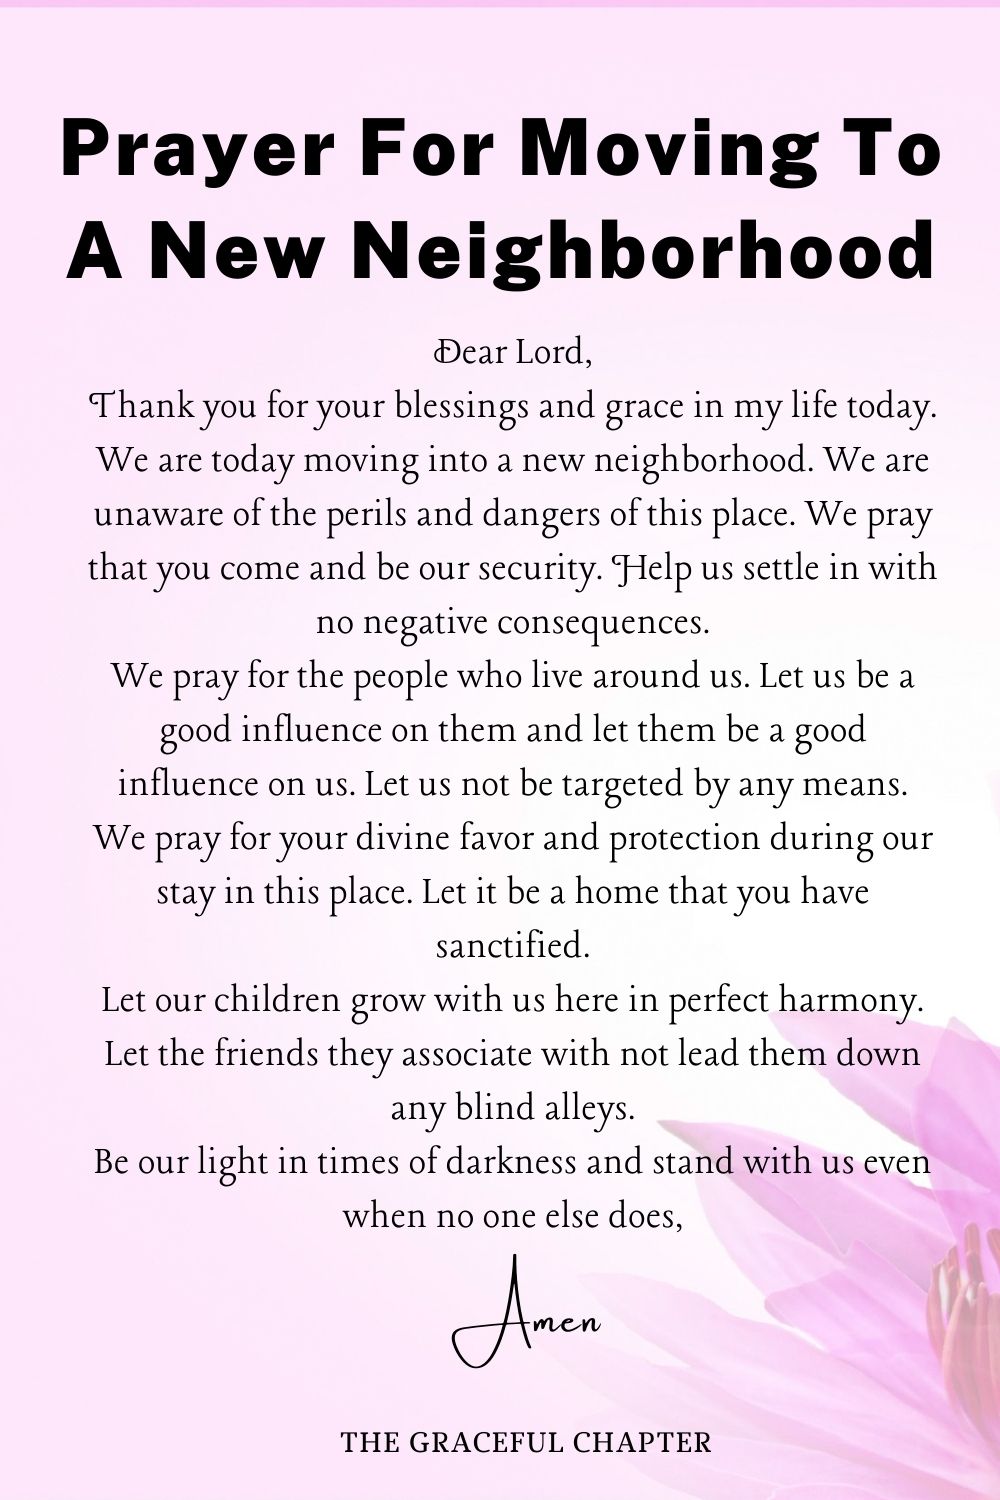 Prayer for moving to a new neighborhood